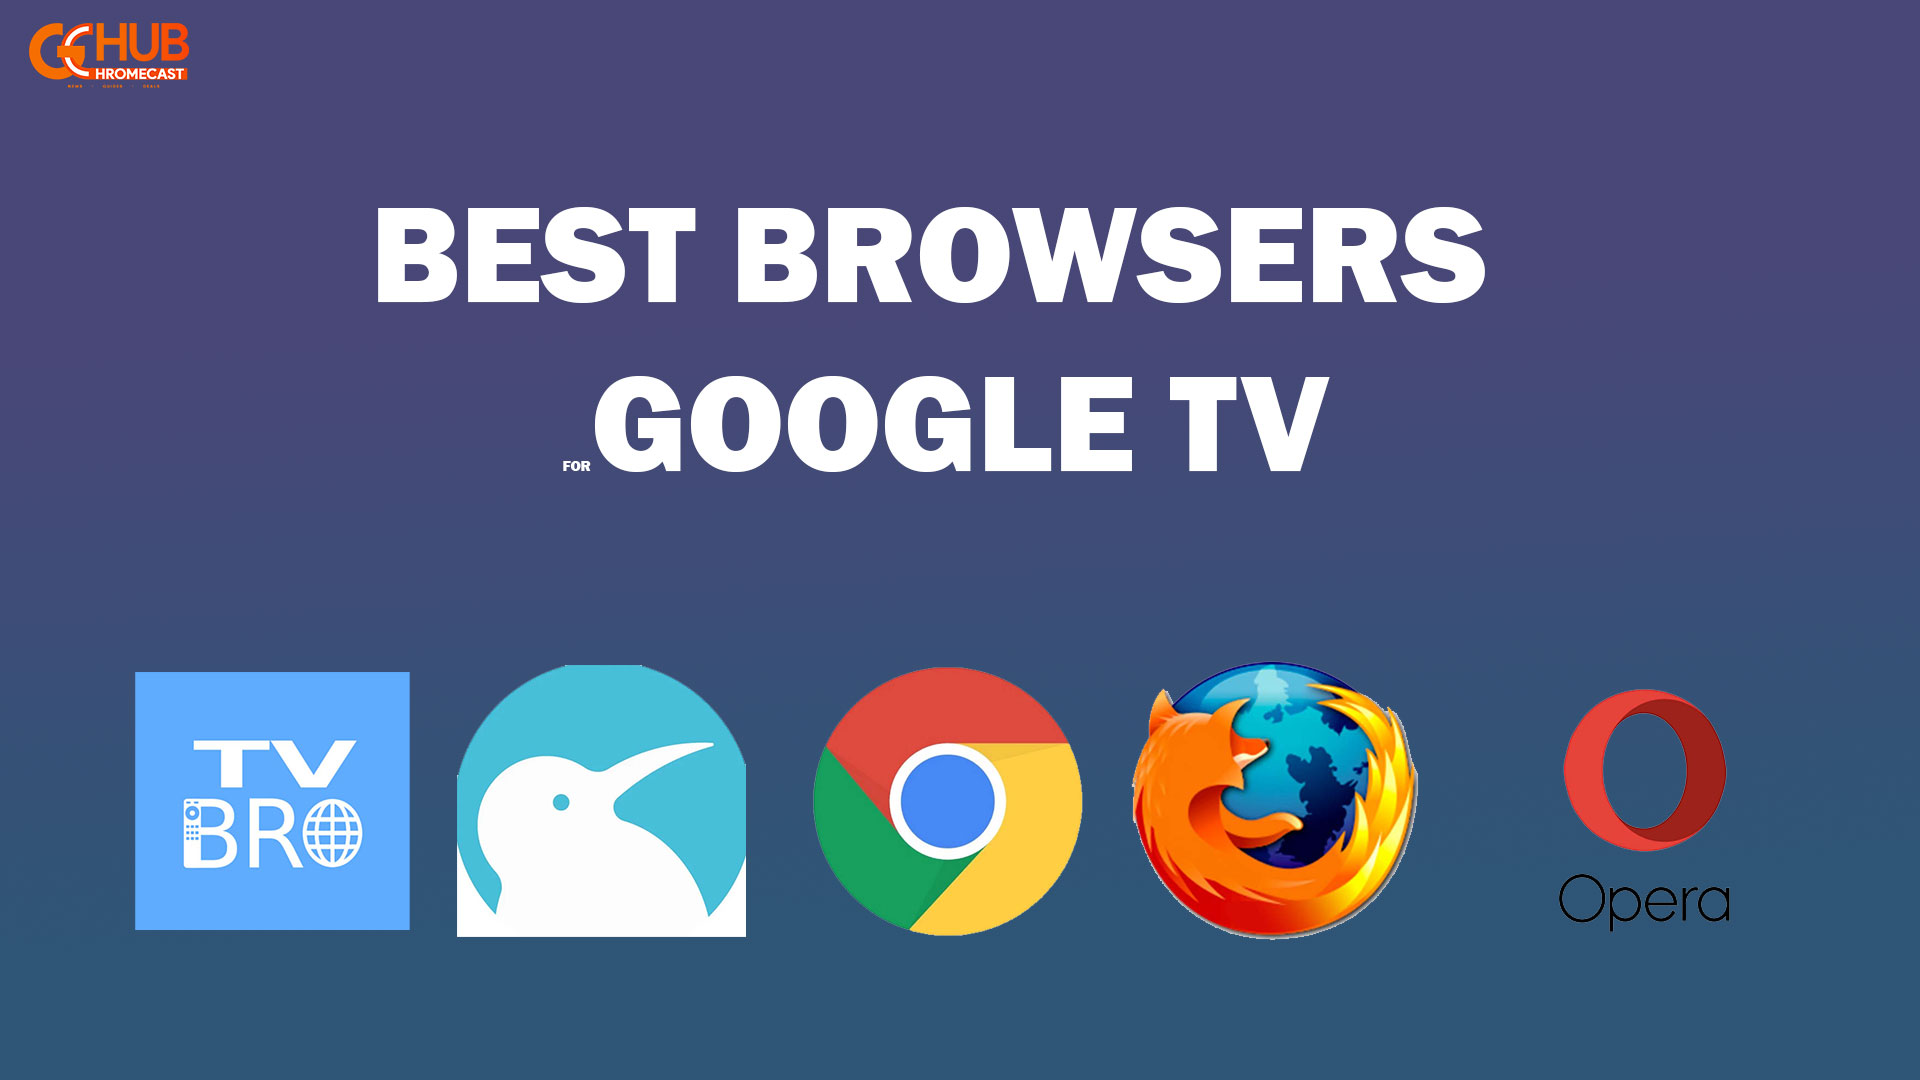 5 best browsers for google tv